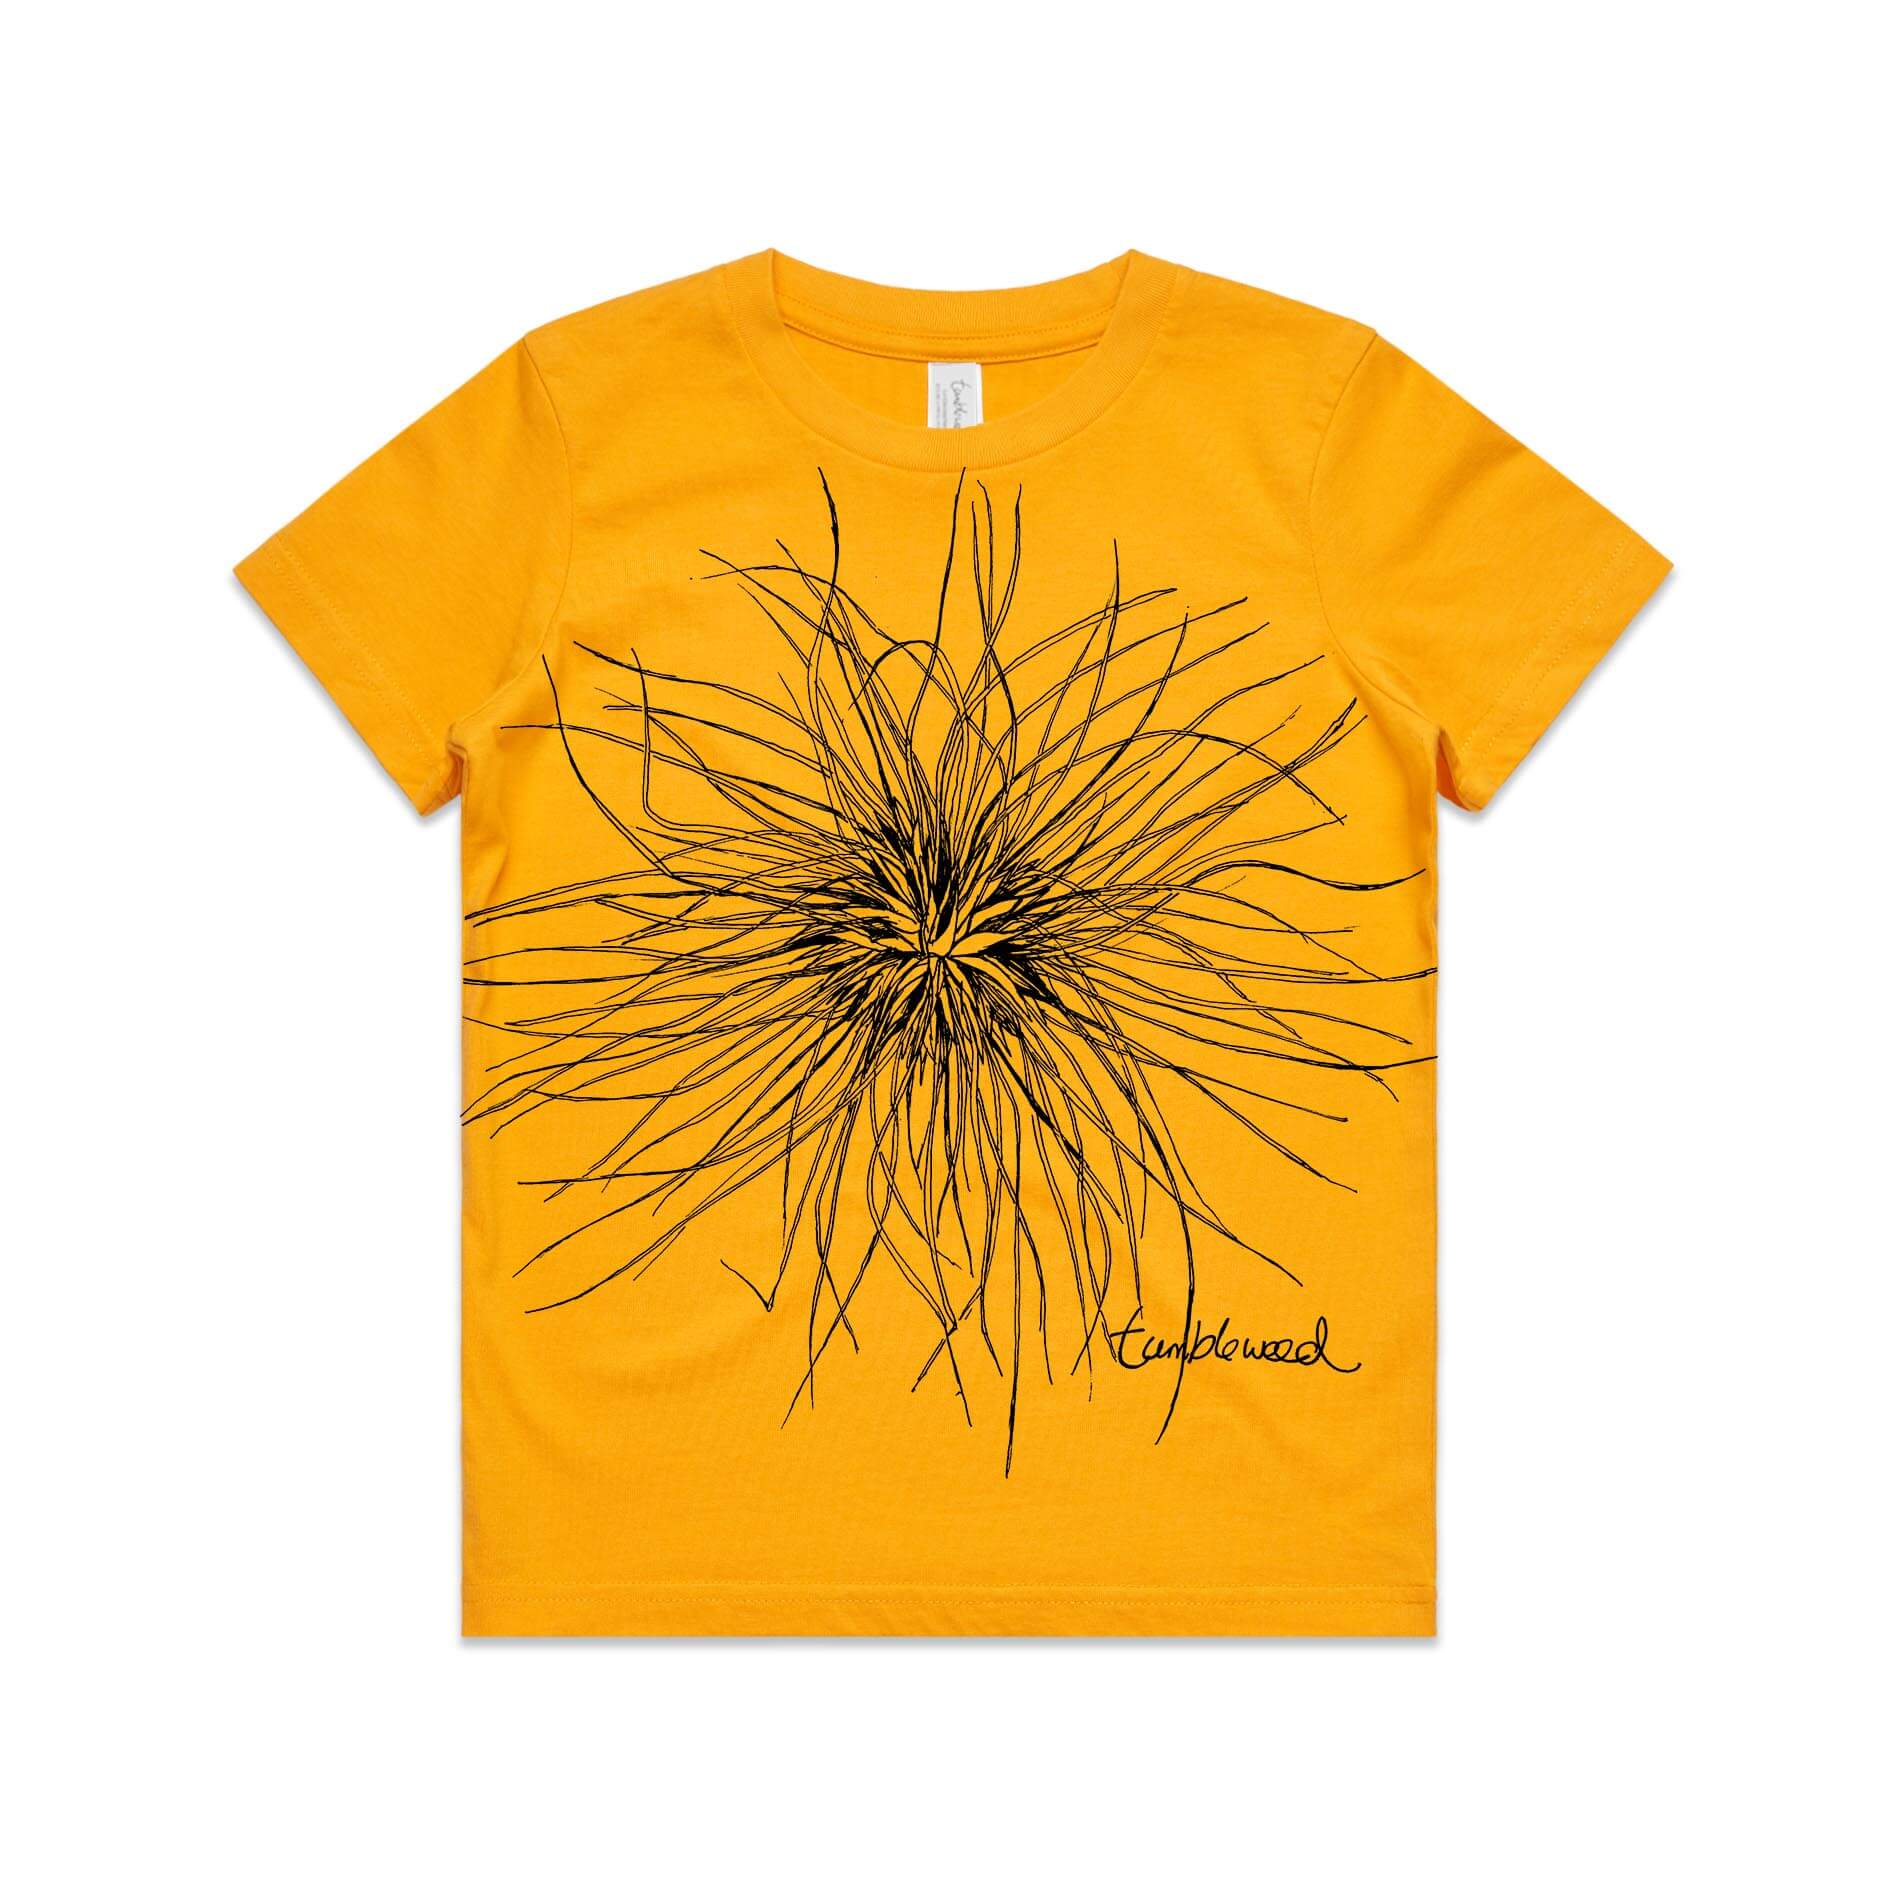 Gold, cotton kids' t-shirt with screen printed Kids tumbleweed/spinifex design.